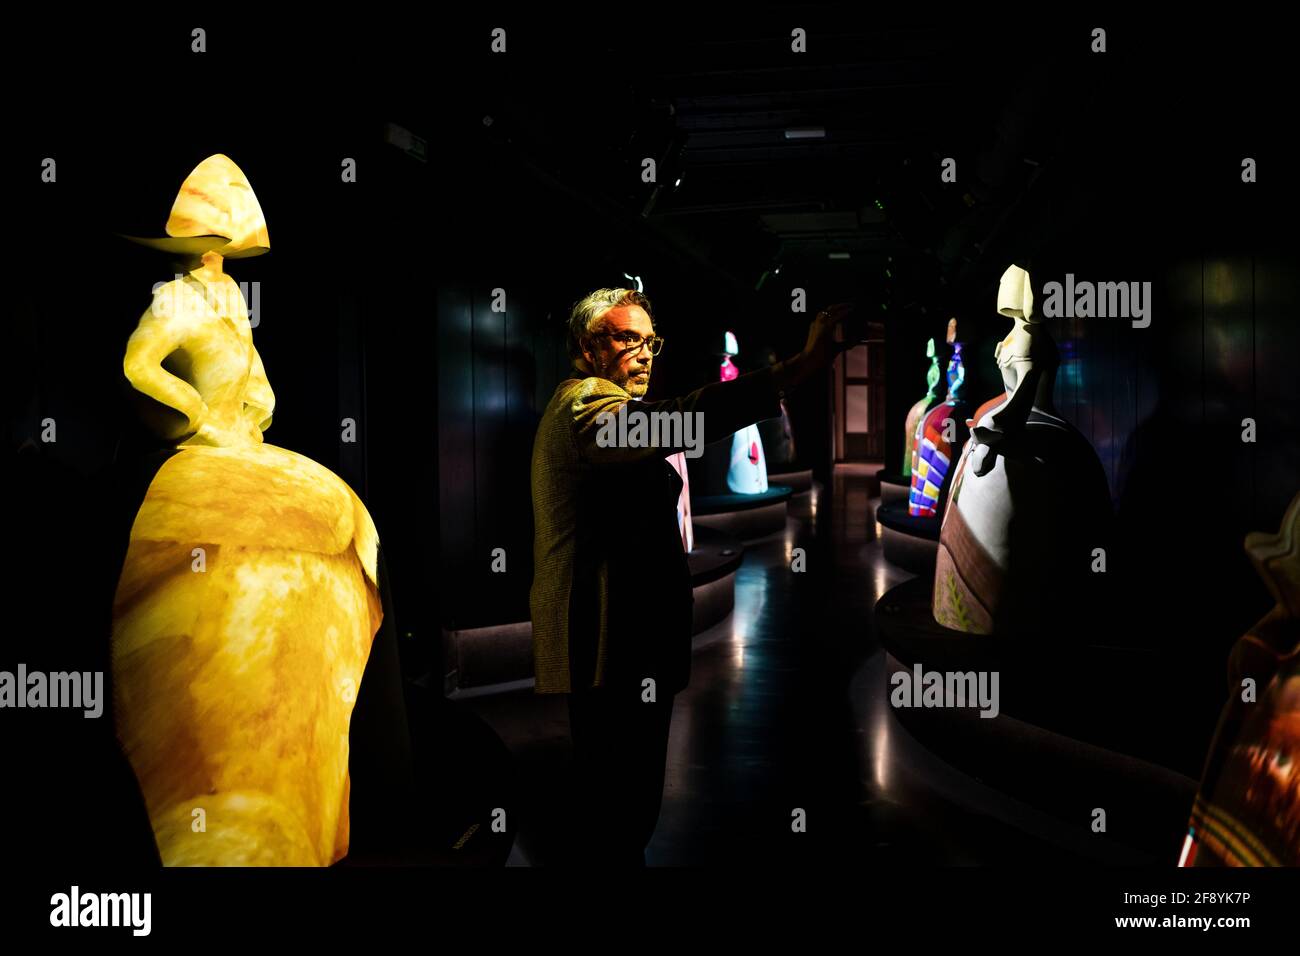 A visitor takes a selfie with the meninas at the Velázques Tech during the inauguration.Within the framework of World Art Day the Interactive Museum of Velázquez, 'Velázquez tech' located on Calle Atocha 12, was inaugurated with the intention of being an immersive experience in the art of Diego Velázquez and his Meninas. The museum has 8 rooms with dozens of high-tech projectors, where you can experience different ways of appreciating the art and history of this seventeenth-century Spanish painter who is recognized as one of the greatest exponents of Spanish, European painting and a master of Stock Photo